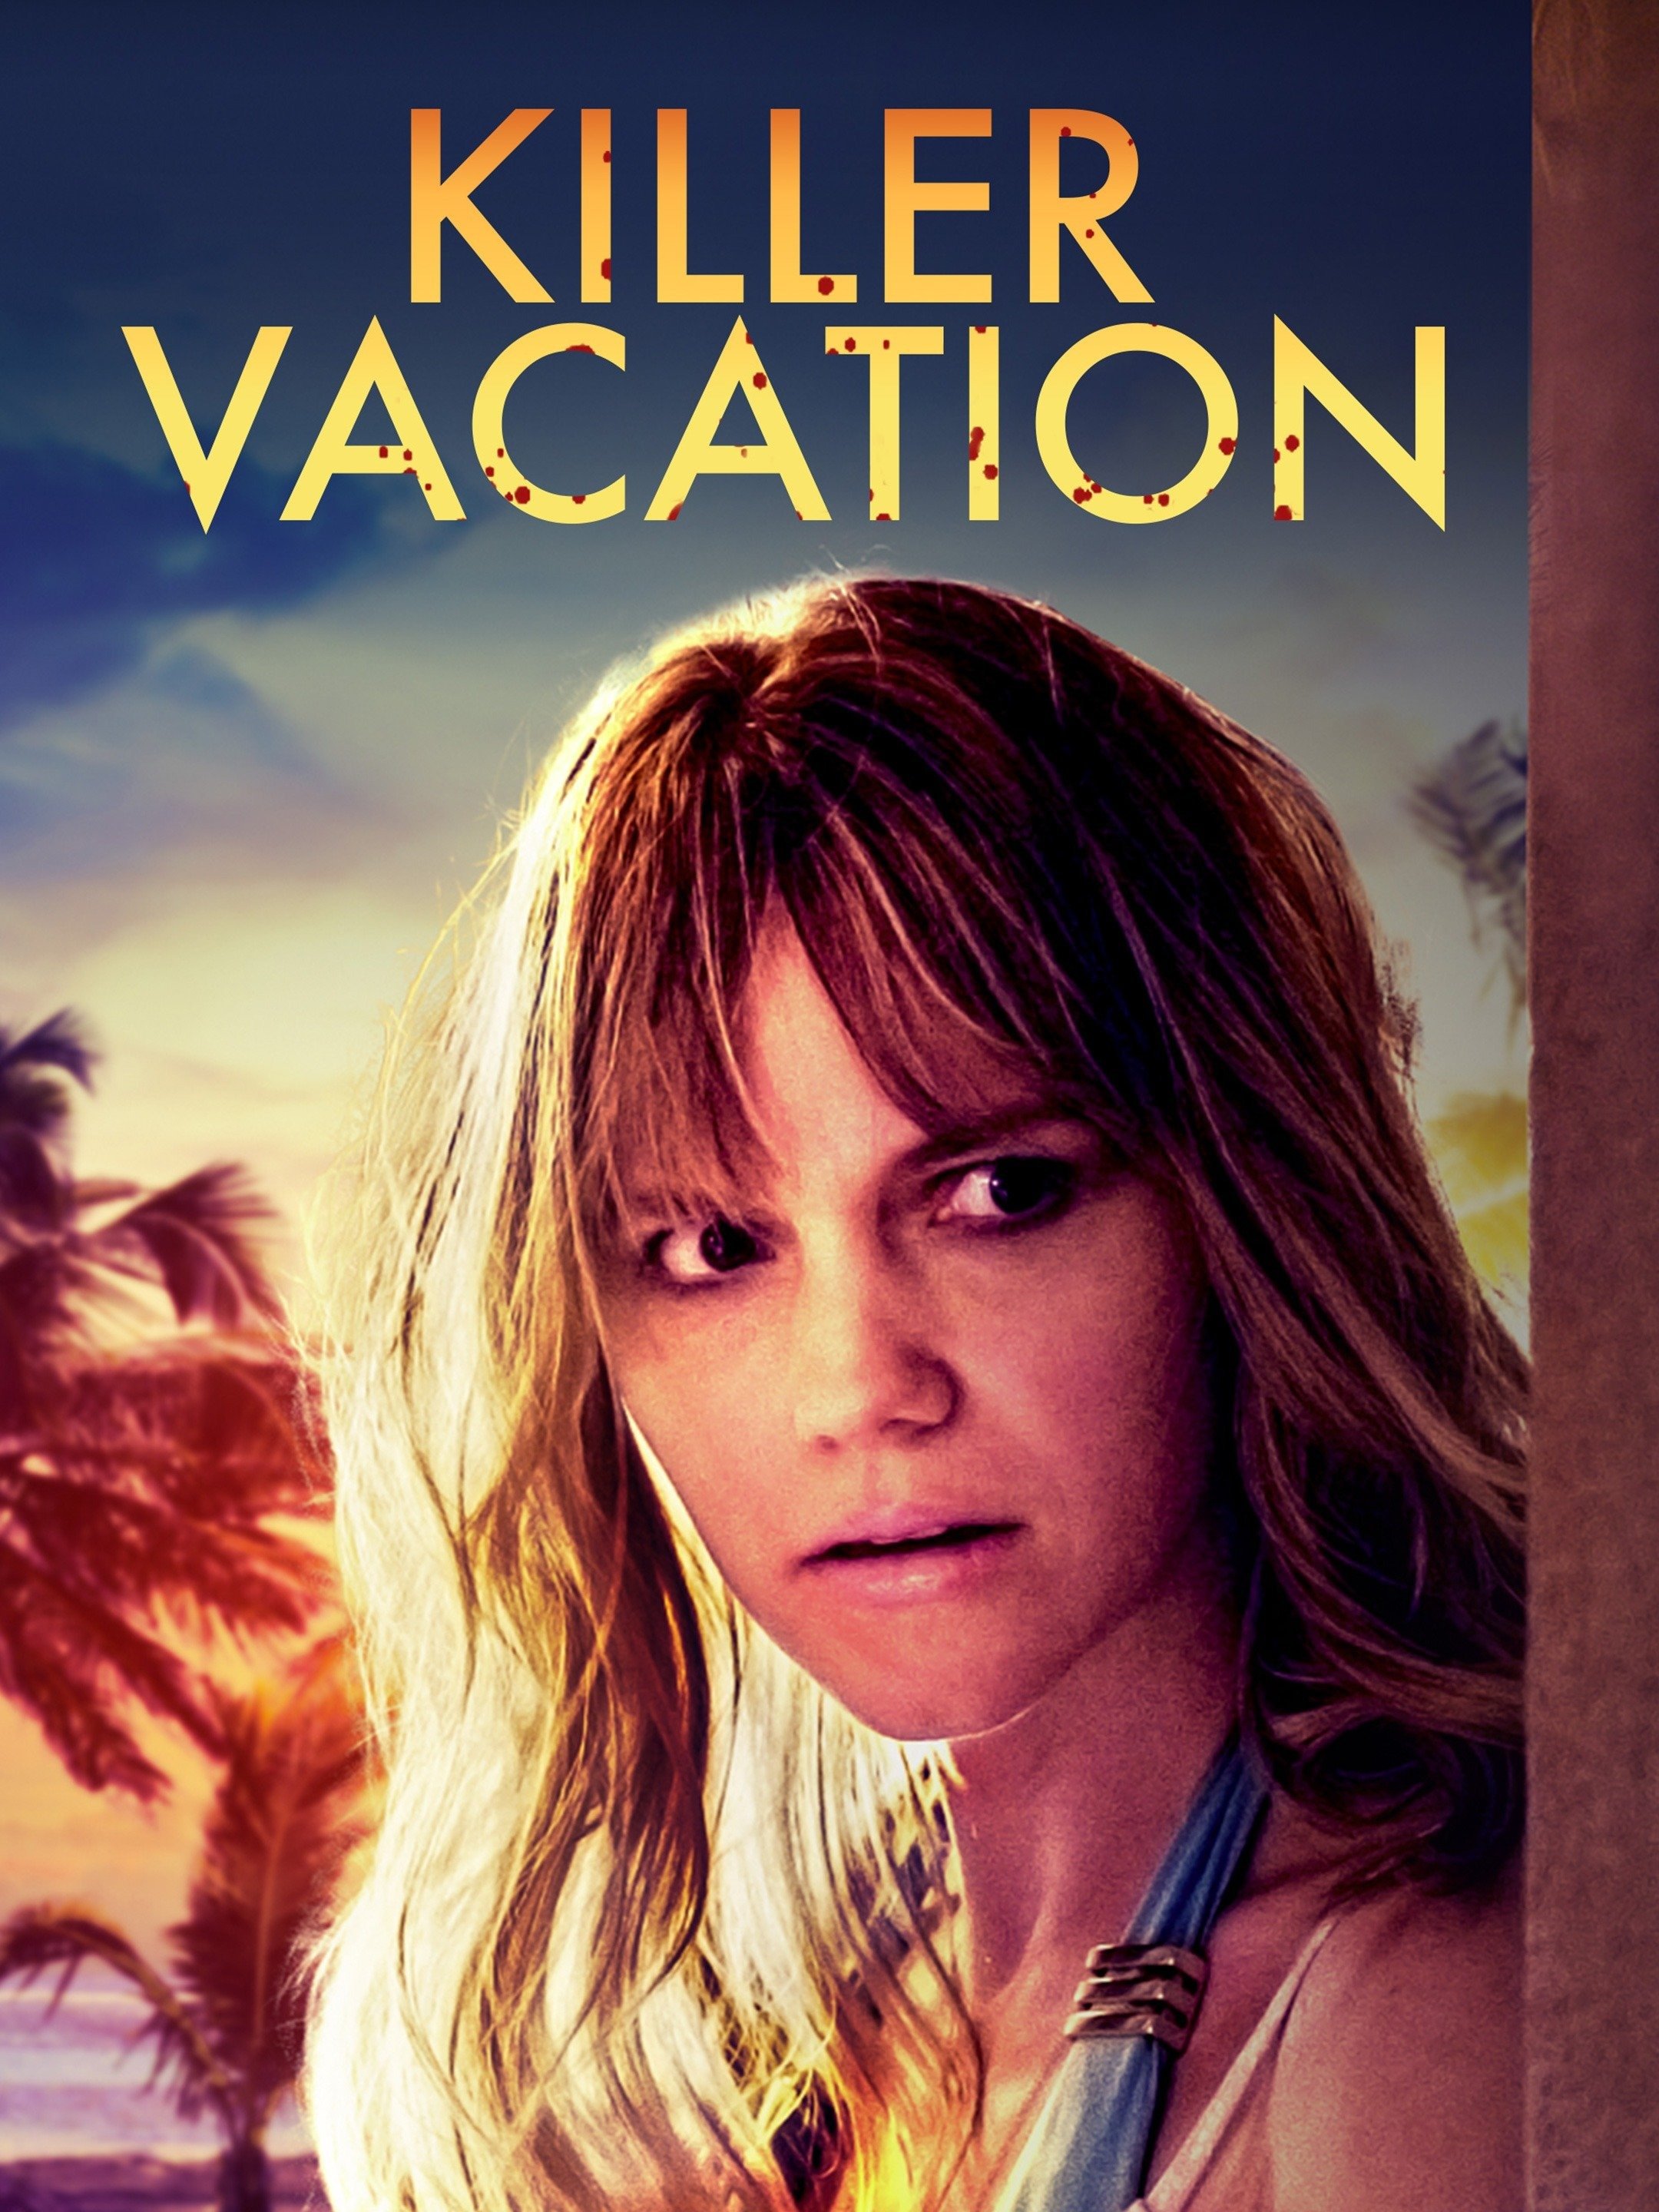 the killer vacation book